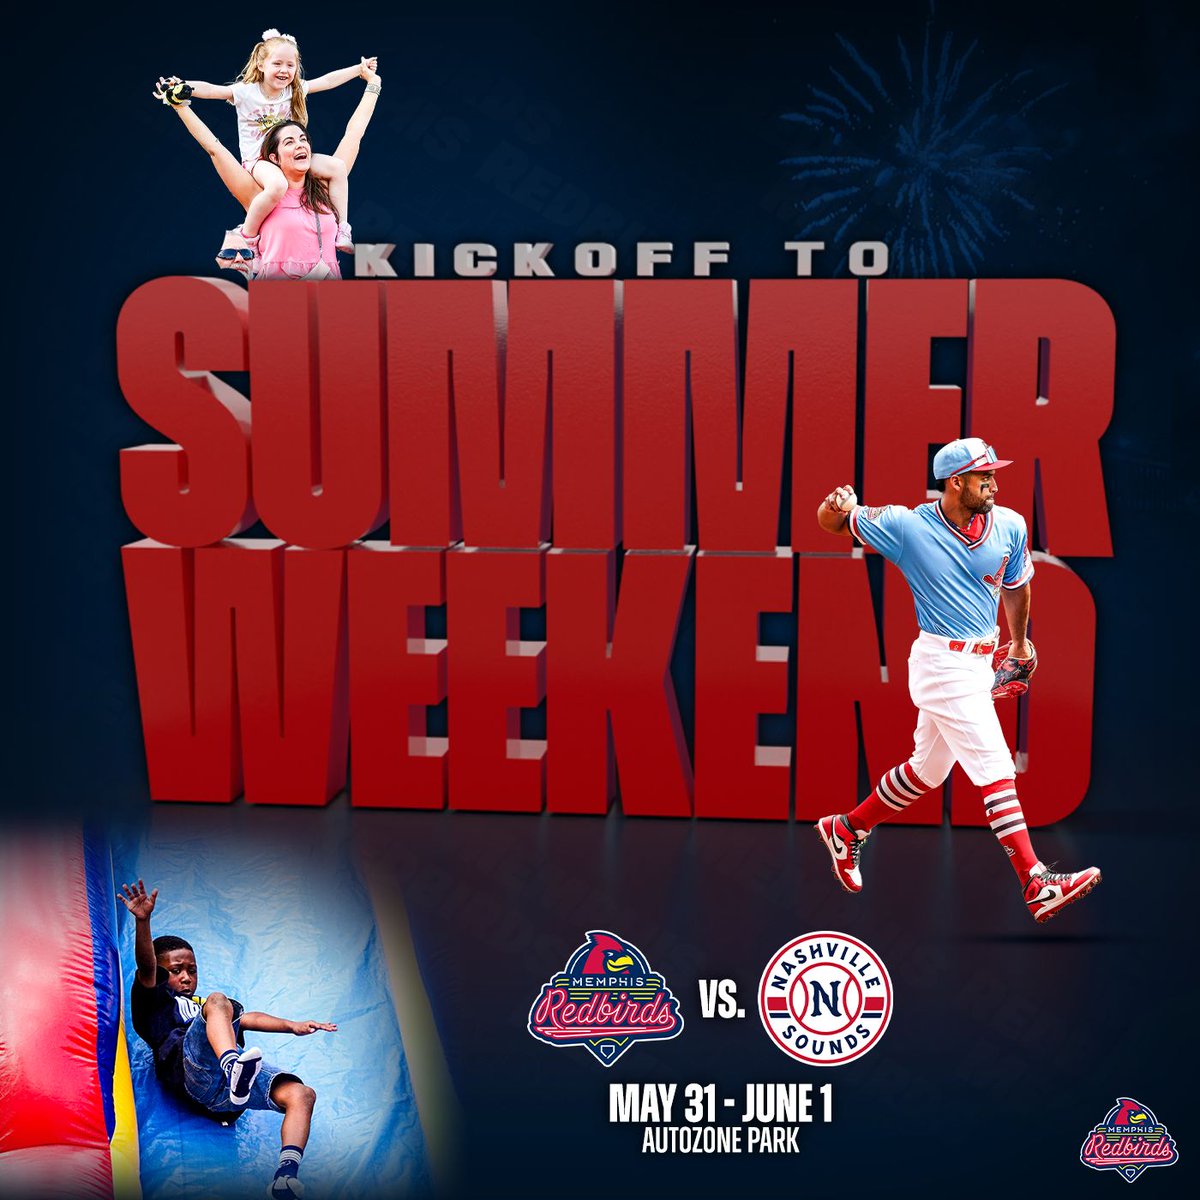 It's almost time for Kickoff to the Summer Weekend at AutoZone Park! ☀️ 🍻 😎 🎈 🖌️ Inflatables and face painters @ Old Bluff Fri. & Sat. 🆓 Pregame Plaza Party Sat. @ 4:30 p.m. 🏖️ Beach Towel giveaway first 1,500 fans Sat. 🎆 Postgame fireworks Sat. 🎟️ milb.com/memphis/ticket…